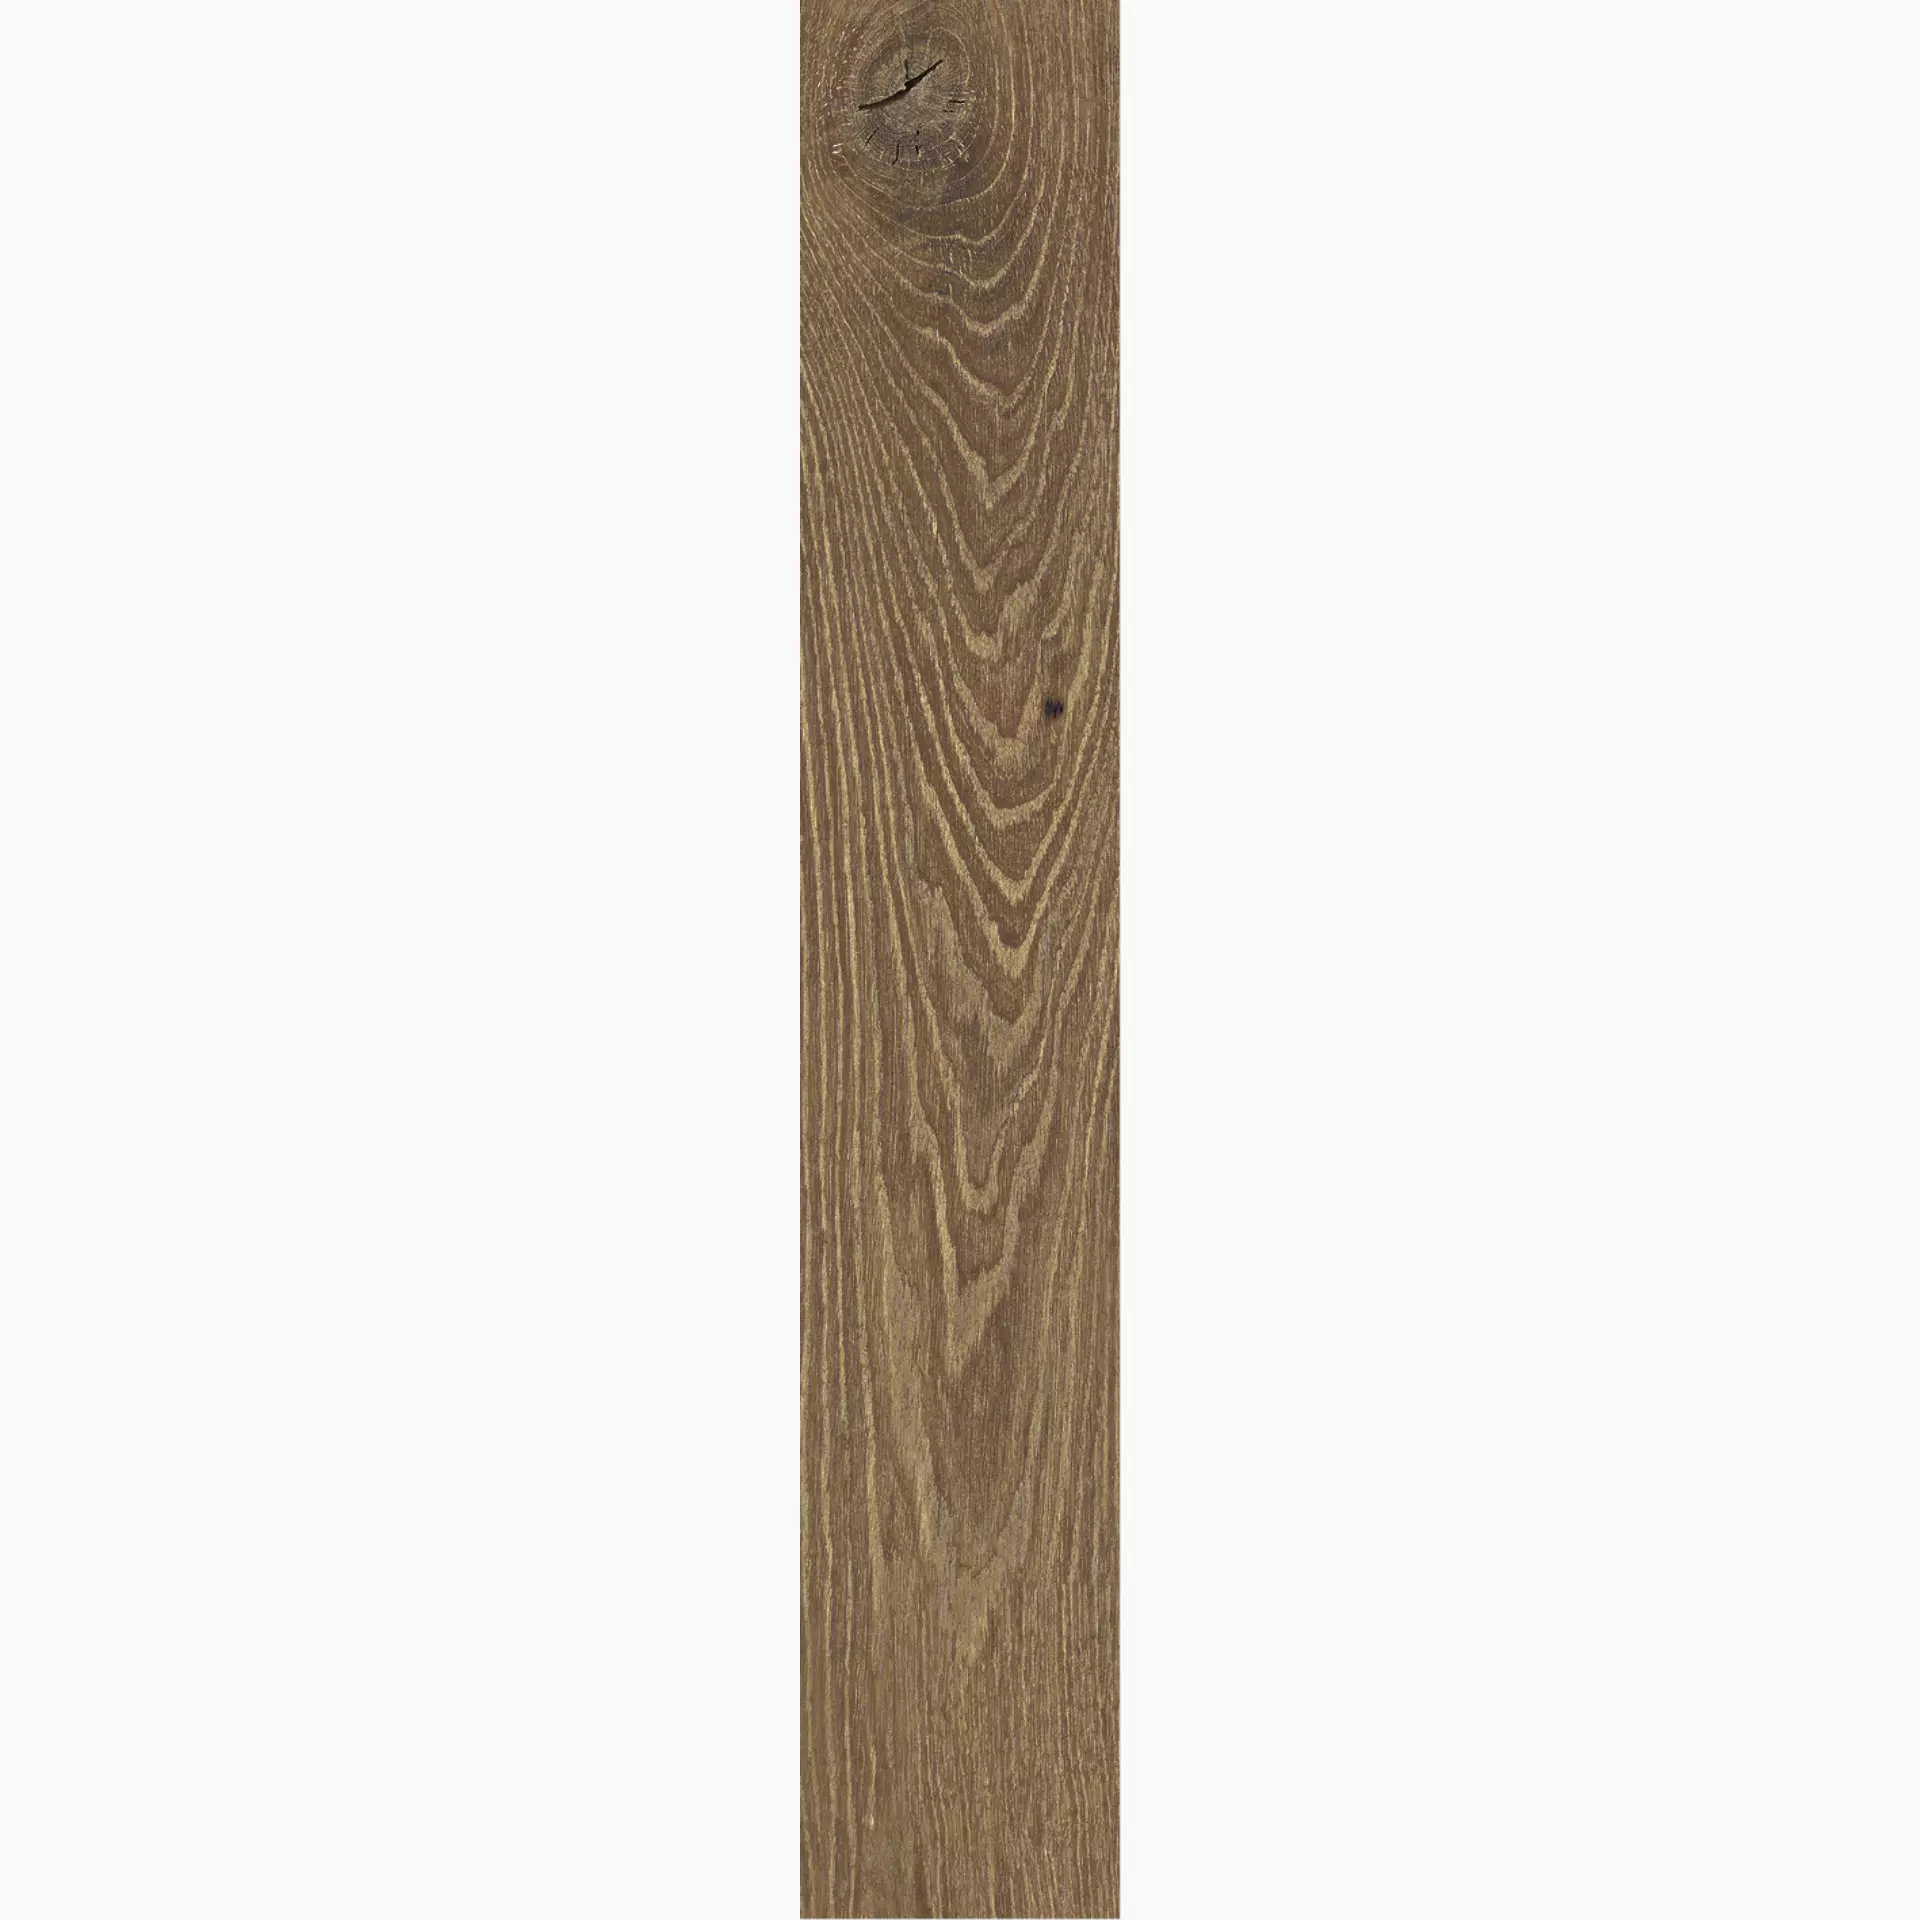 Novabell Artwood Clay Antislip AWD27AS 20x120cm rectified 9mm